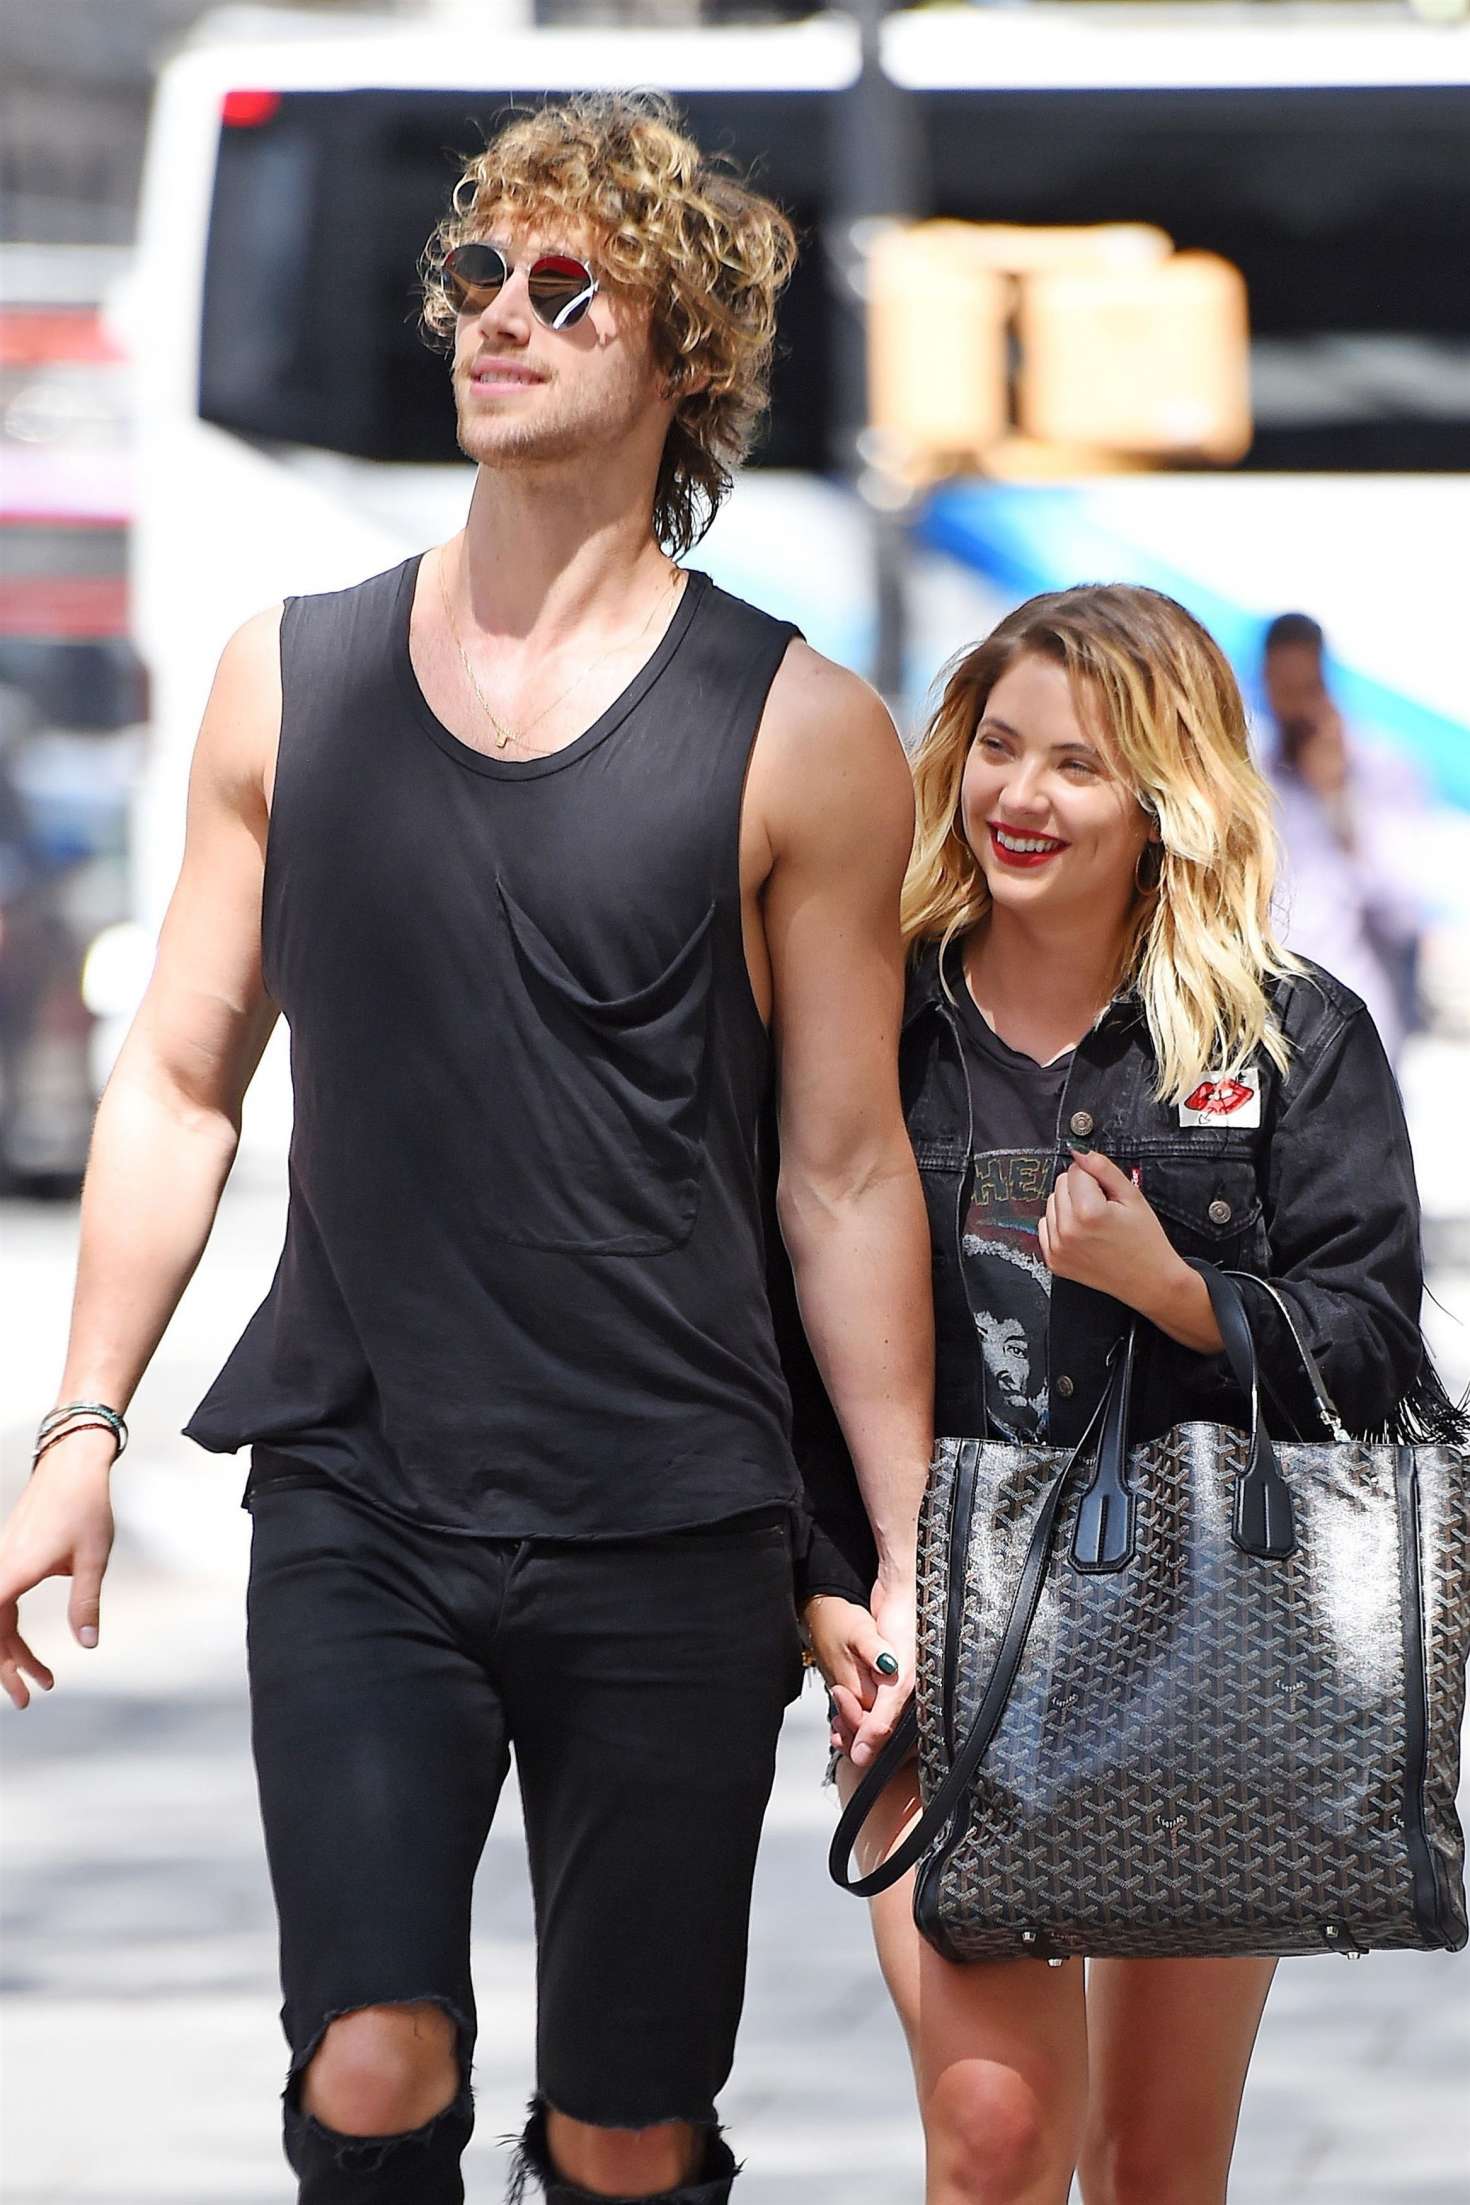 Ashley Benson with boyfriend out in NYC